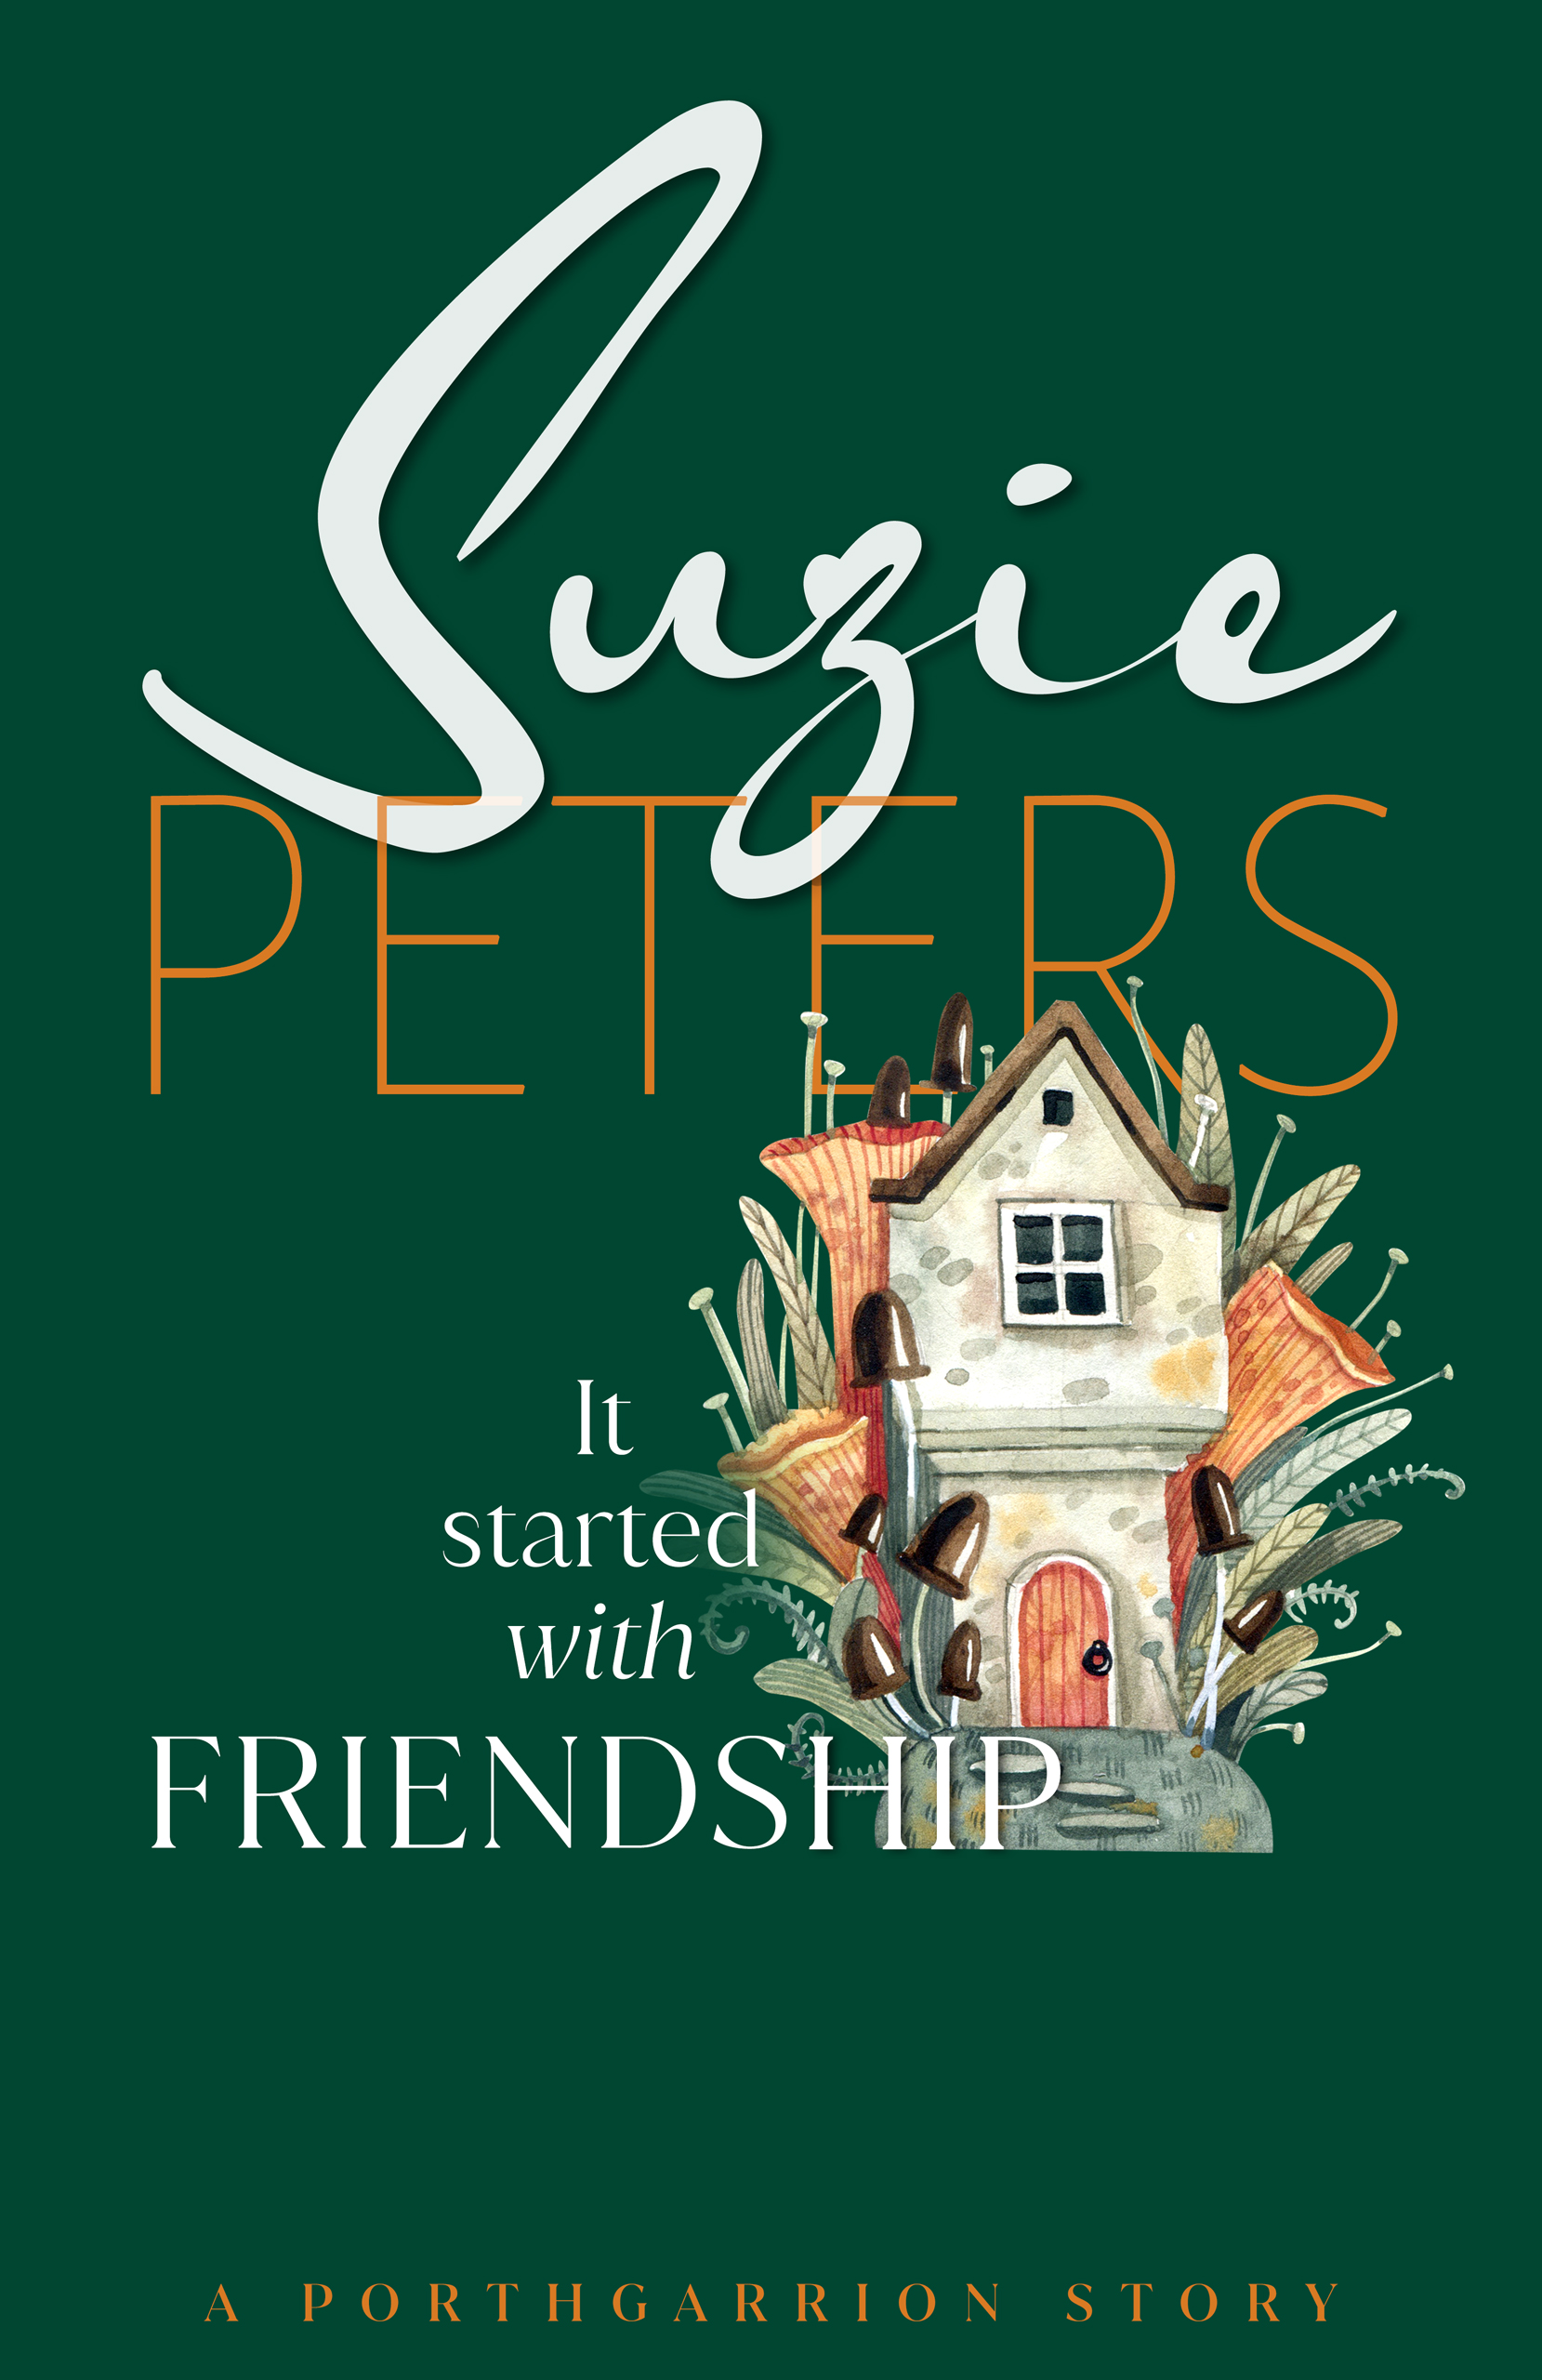 Porthgarrion Series: It Started with Friendship by Suzie Peters.